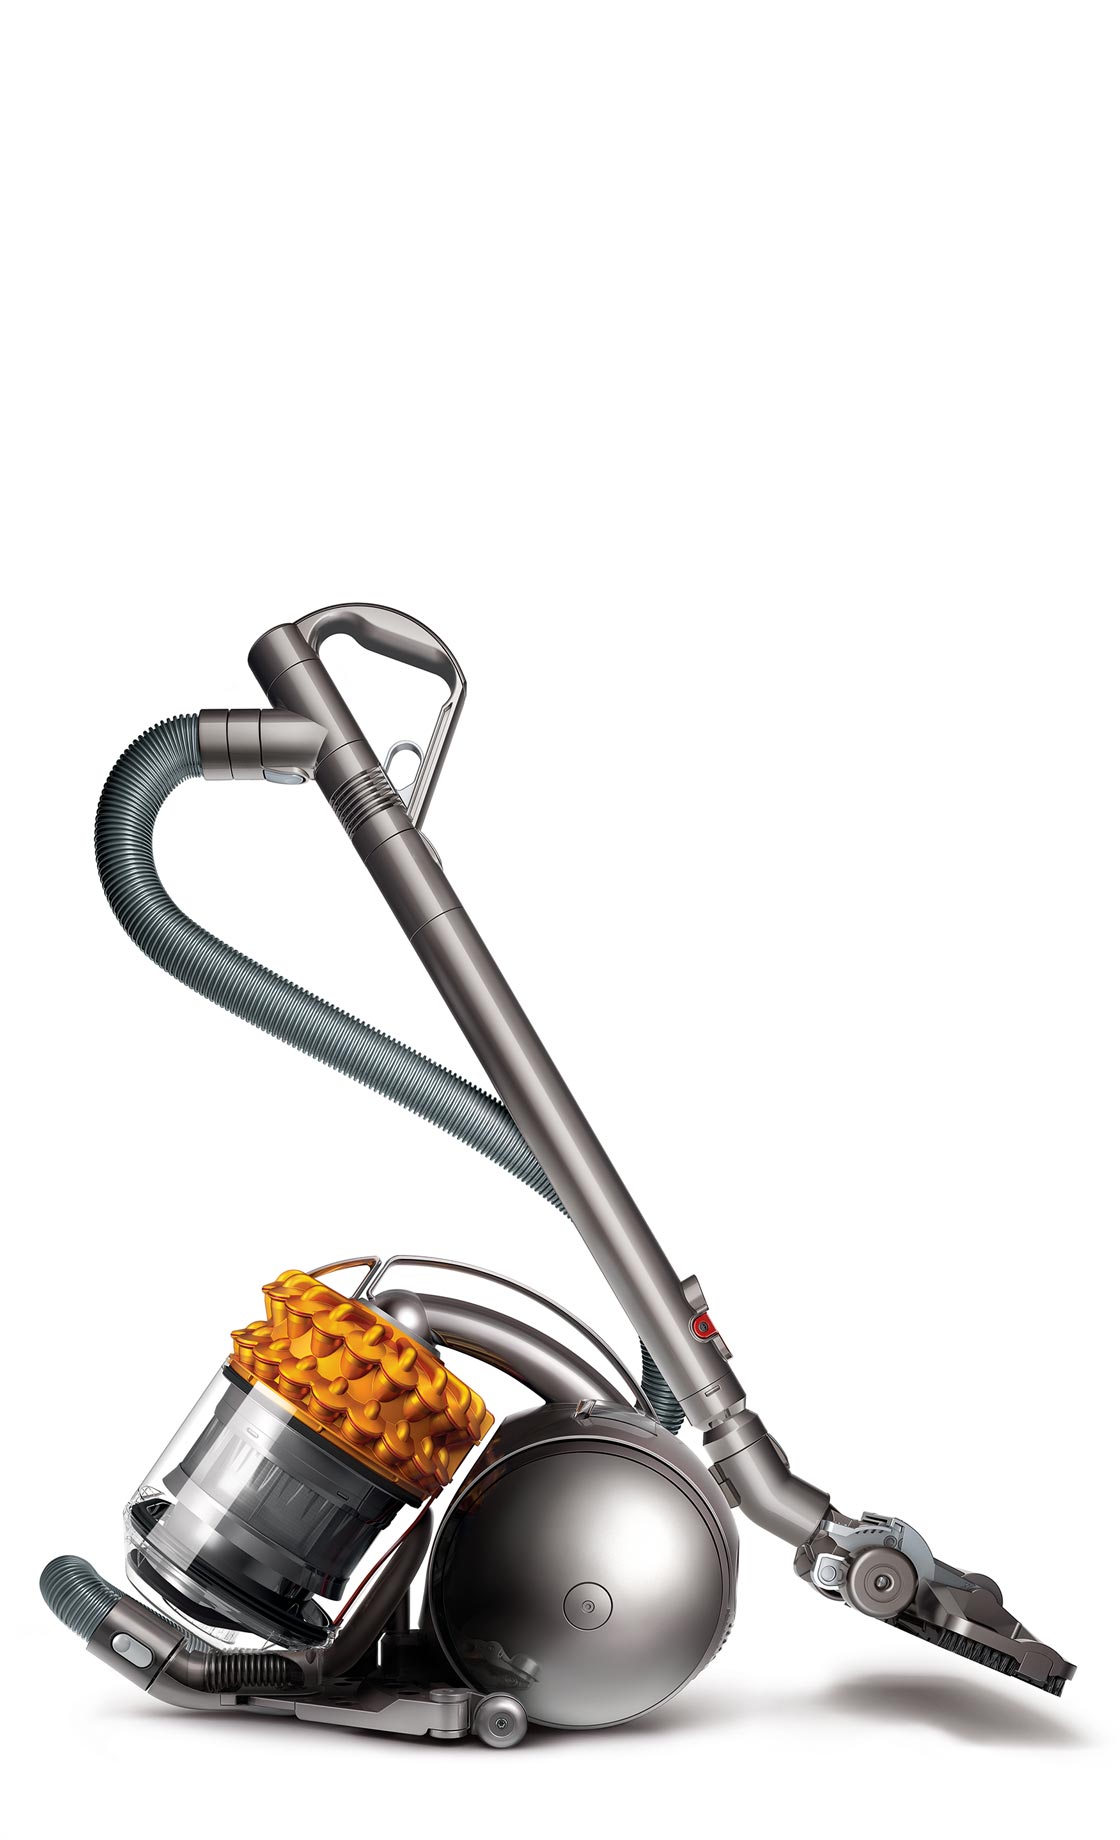 What kinds of damage are covered by a Dyson vacuum cleaner warranty?